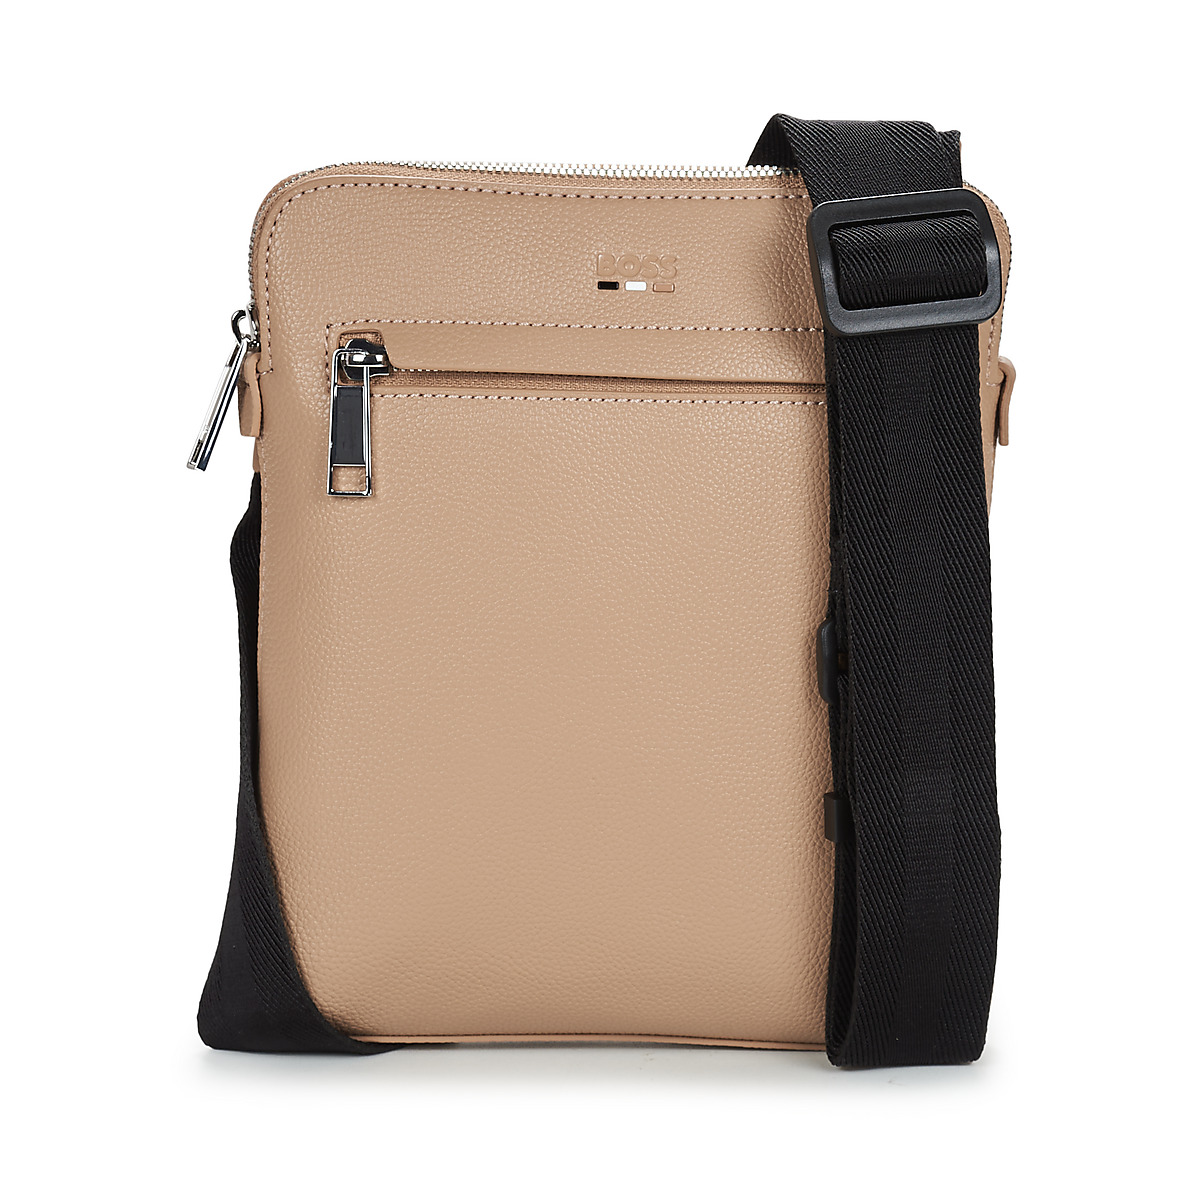 BOSS Ray_S zip env Beige - Free Delivery with Rubbersole.co.uk ! - Bags  Pouches / Clutches Men £